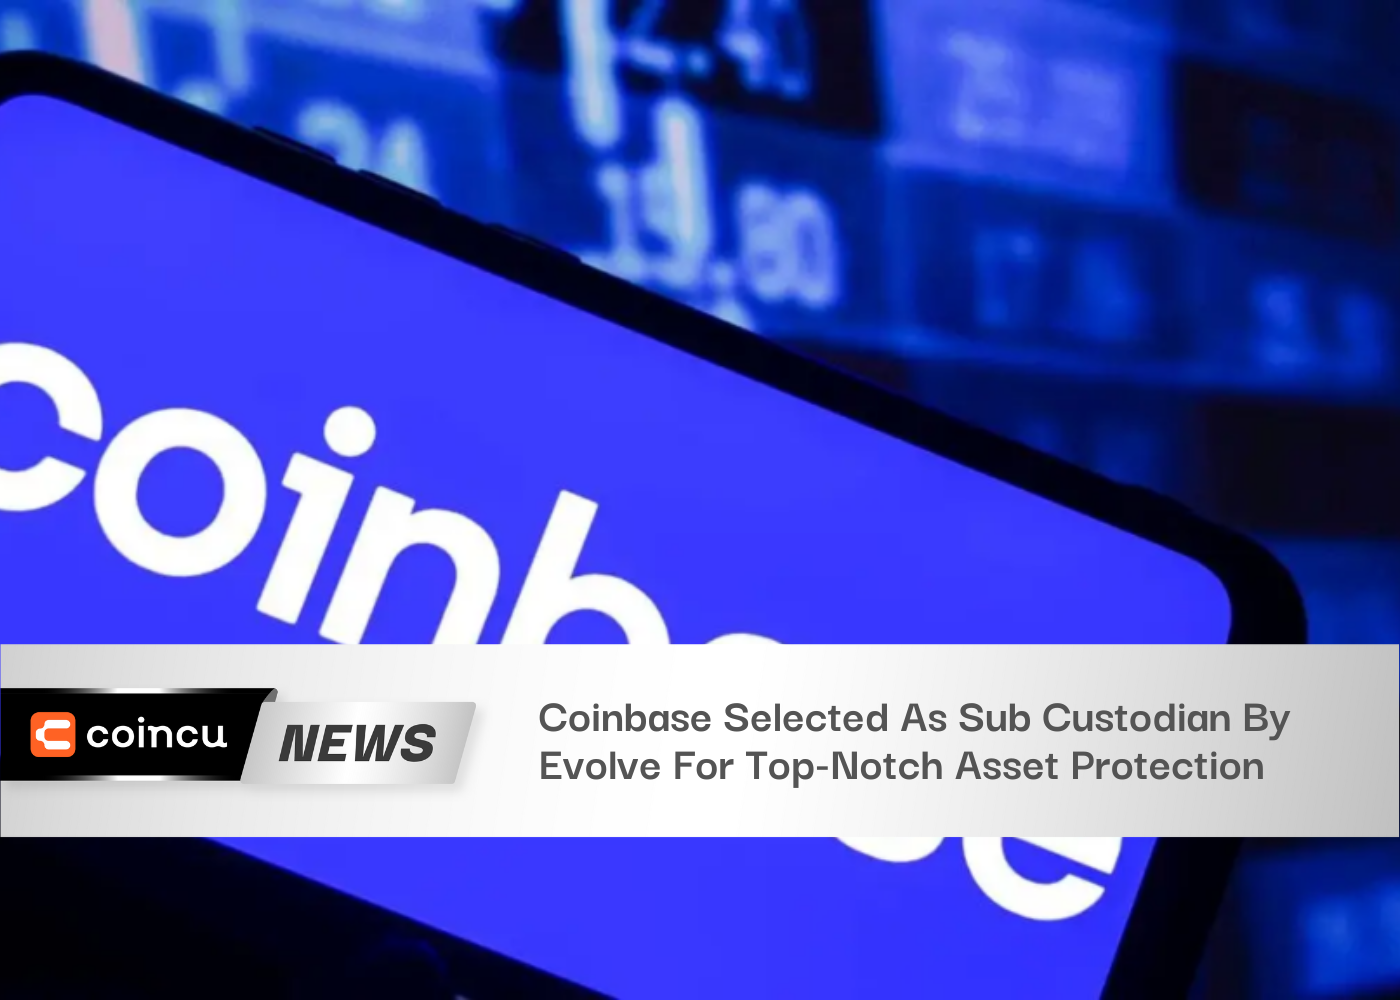 Coinbase Selected As Sub Custodian By Evolve For Top-Notch Asset Protection